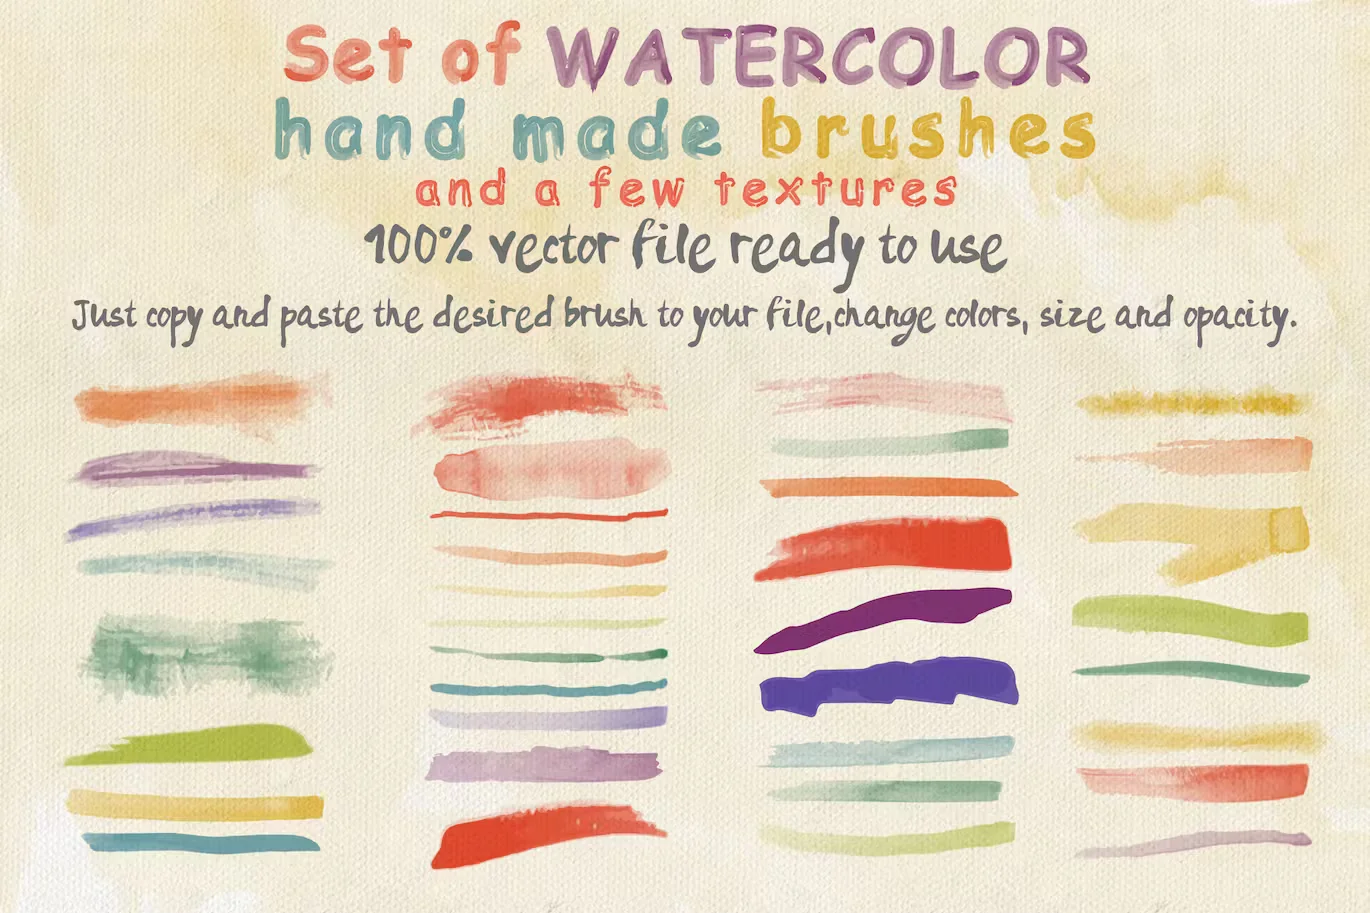 Set of Watercolor Brushes and Textures